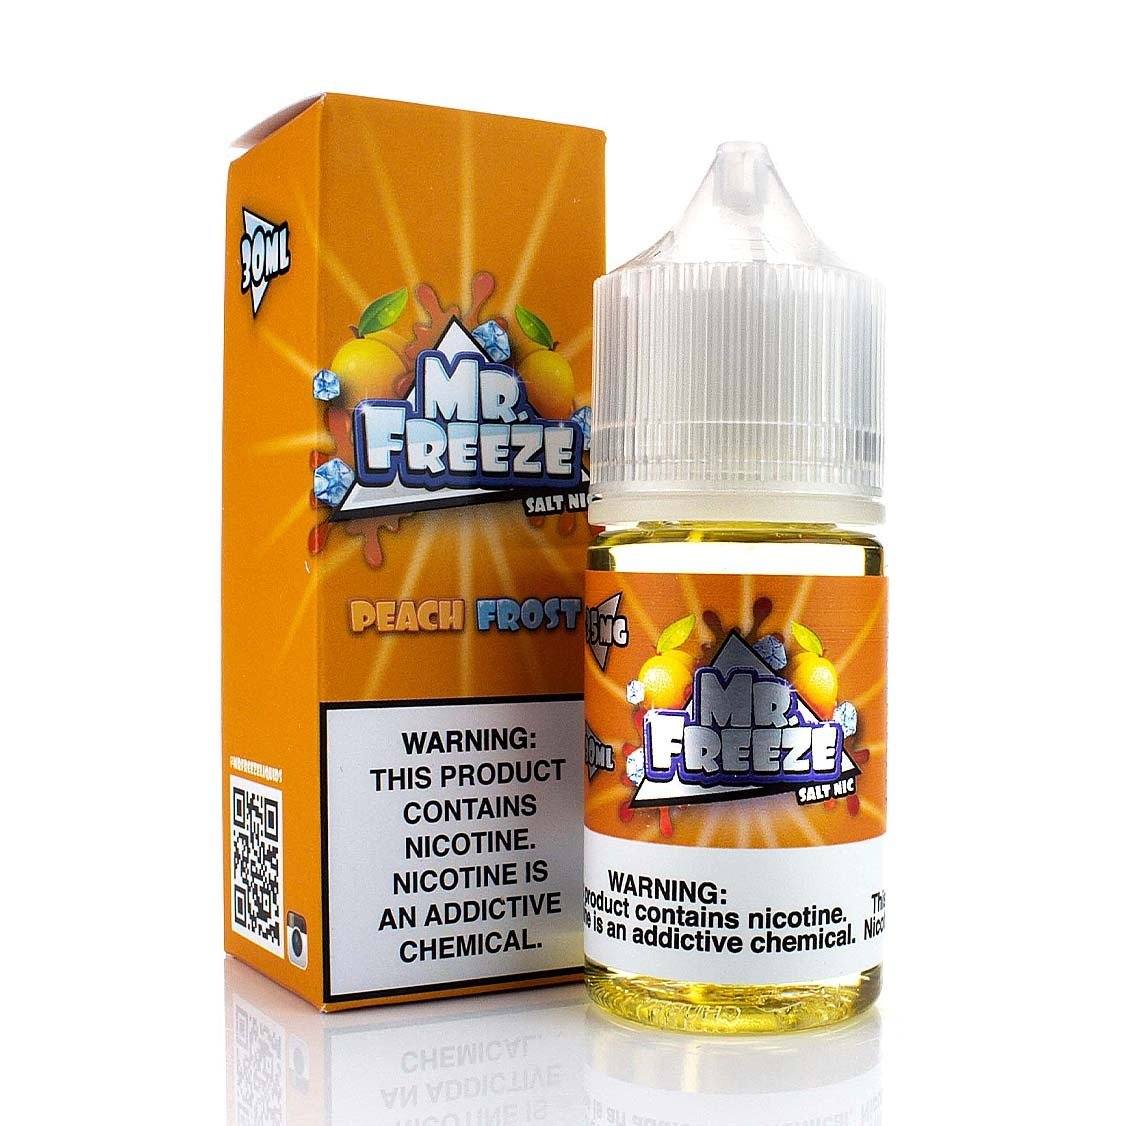 Peach Frost by Mr. Freeze Salt Nic 30ml with Packaging